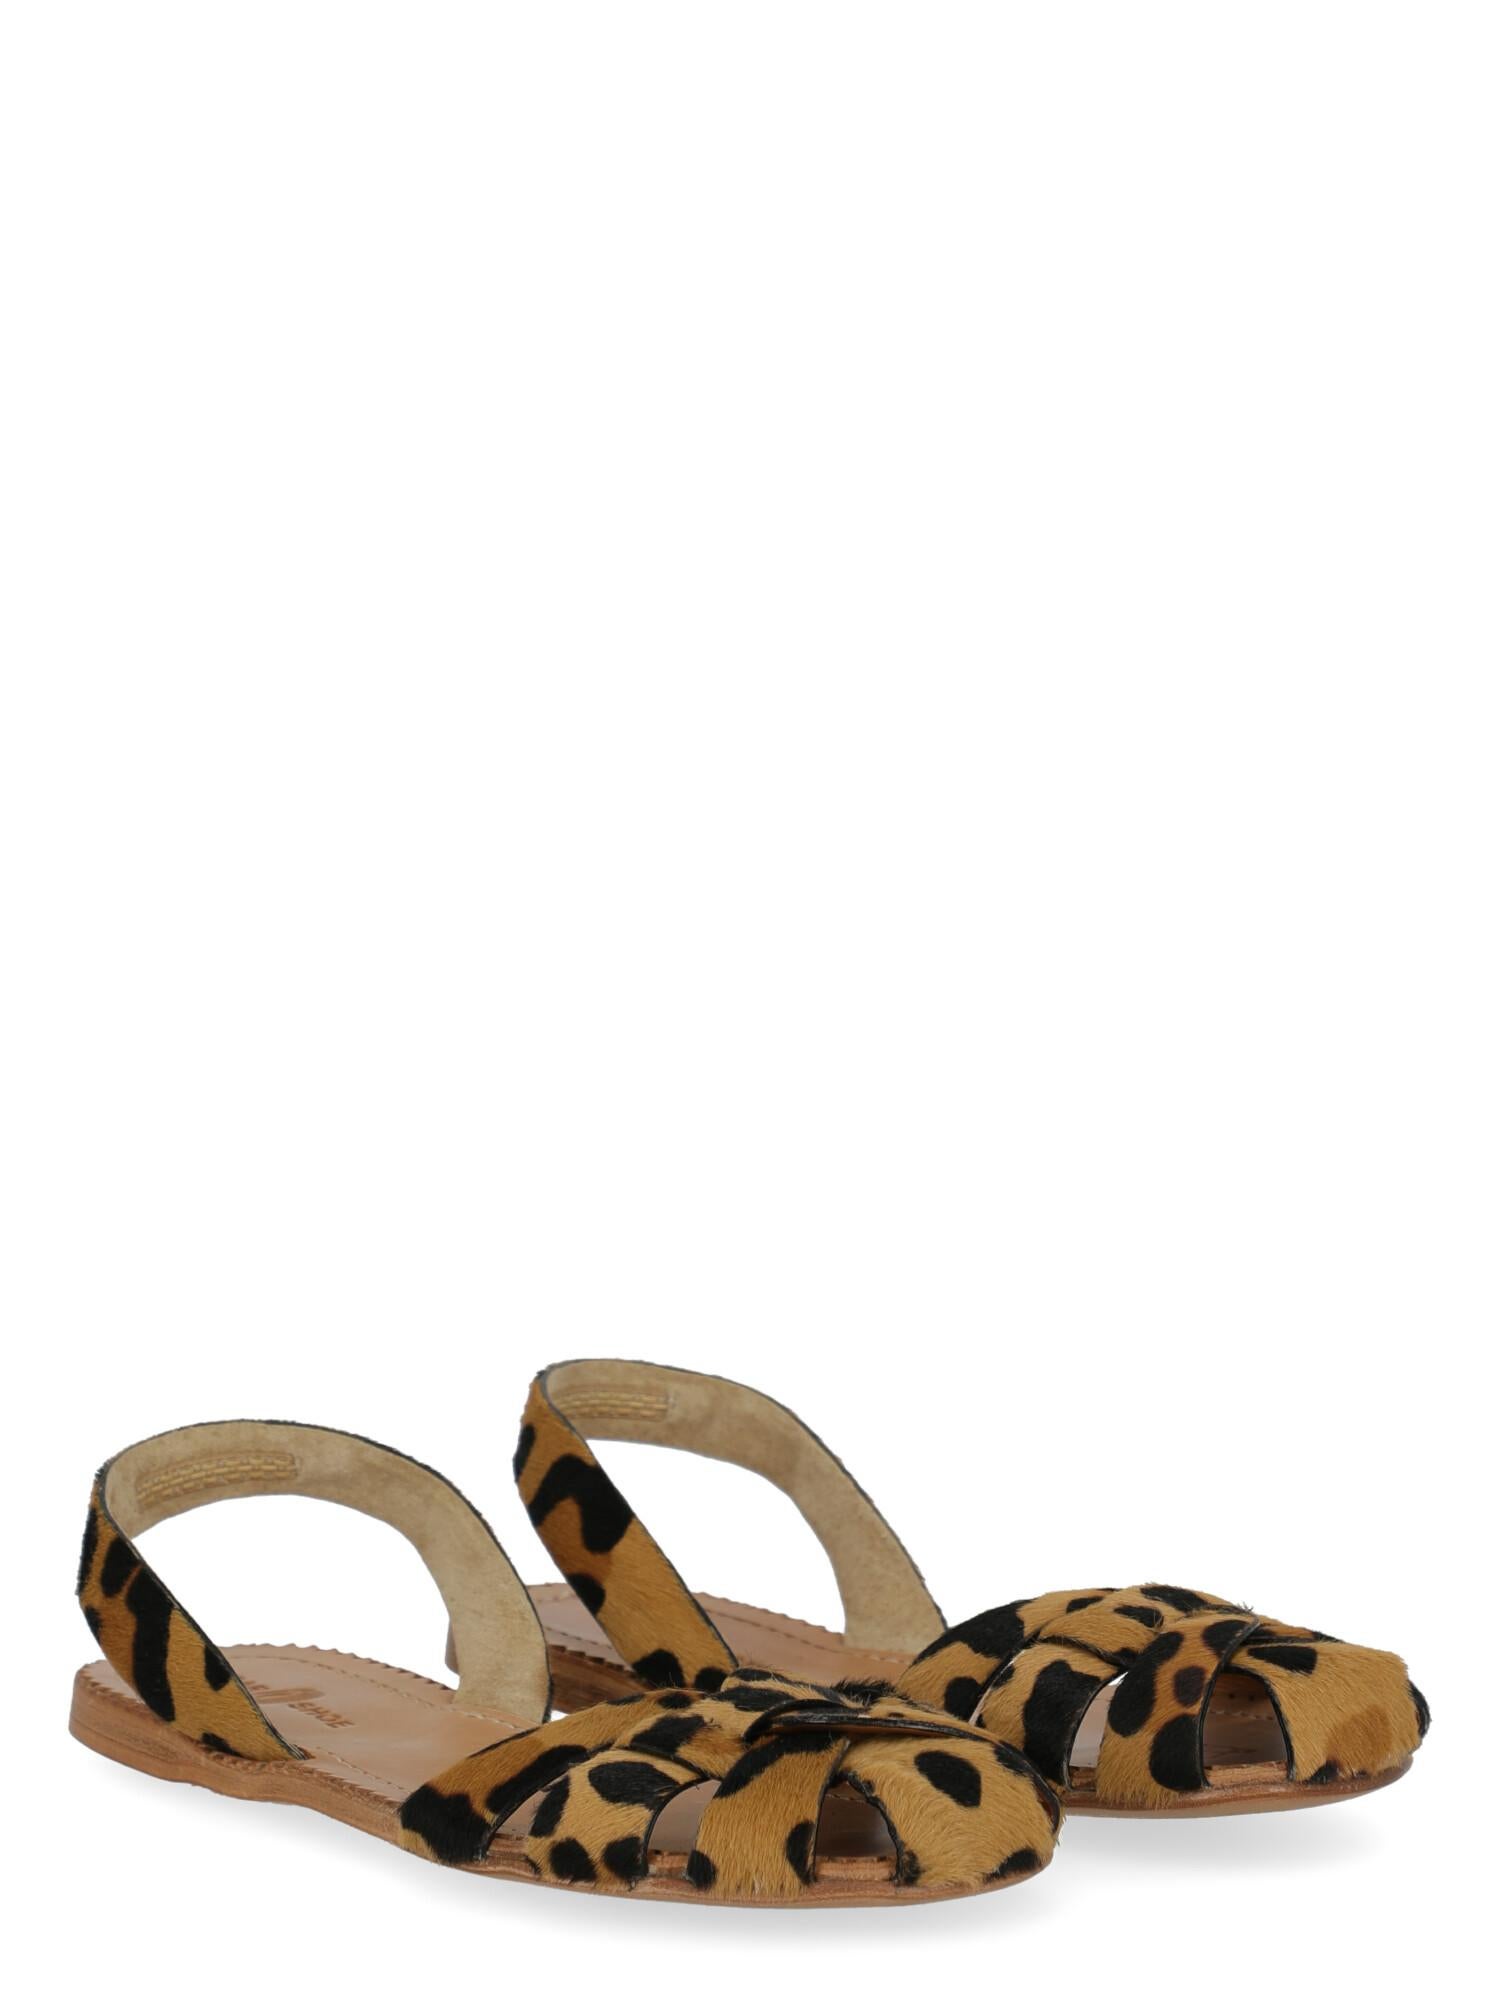 Slippers, leather, animal print, backless design, pony, round toe, branded insole, branded sole, woven detail

Includes:N\A

Product Condition: Very Good
Insole: visible wrinkling, slightly visible stains.

Measurements: N\A

Composition: Upper 100%